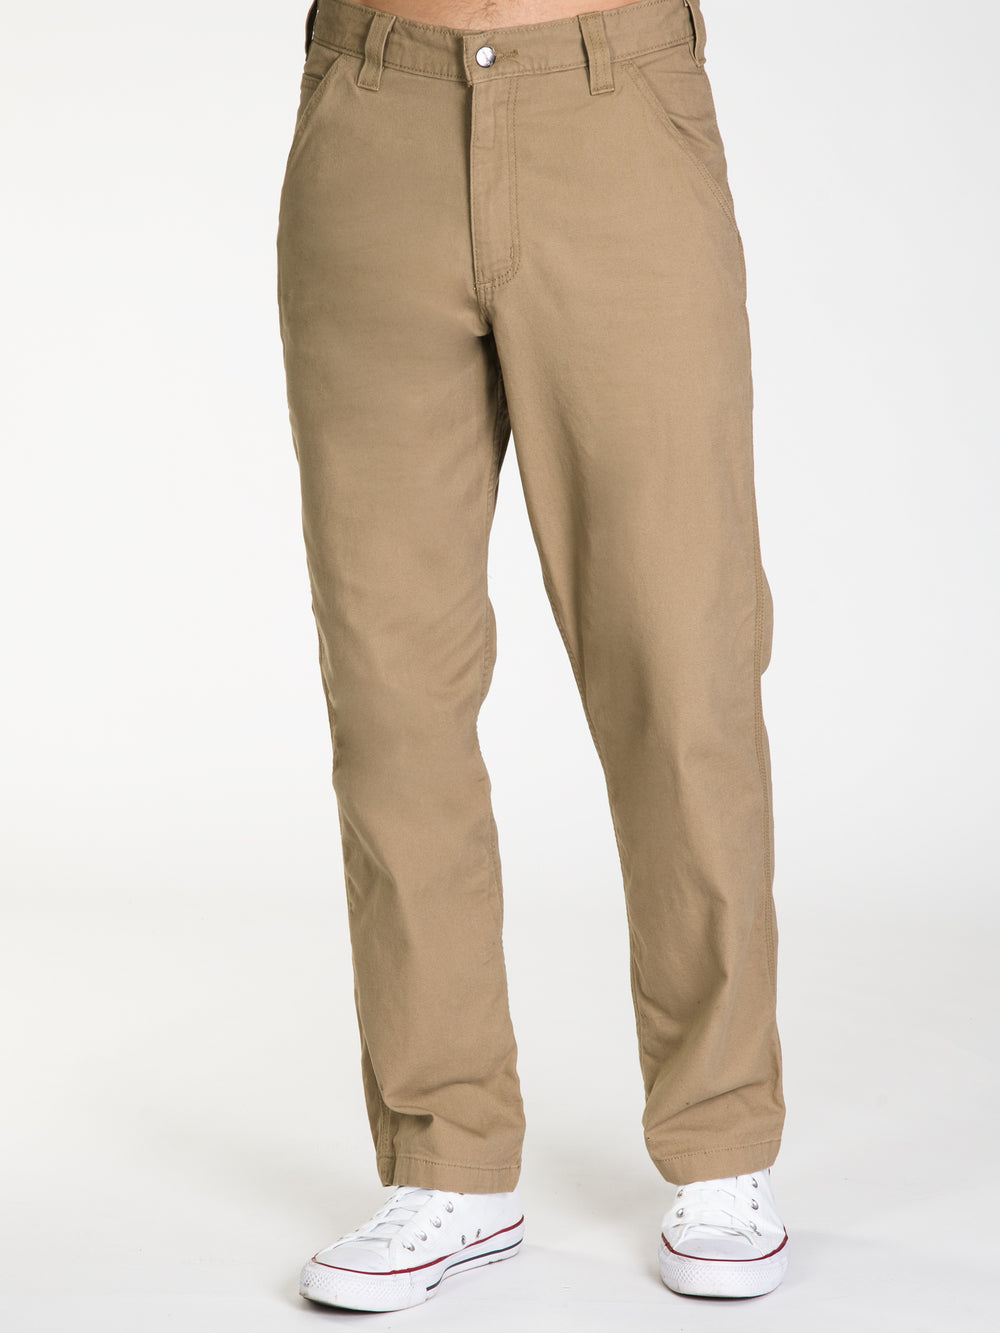 Men's Cargo Work Pant - Relaxed Fit - Rugged Flex® - Canvas, Coming Soon